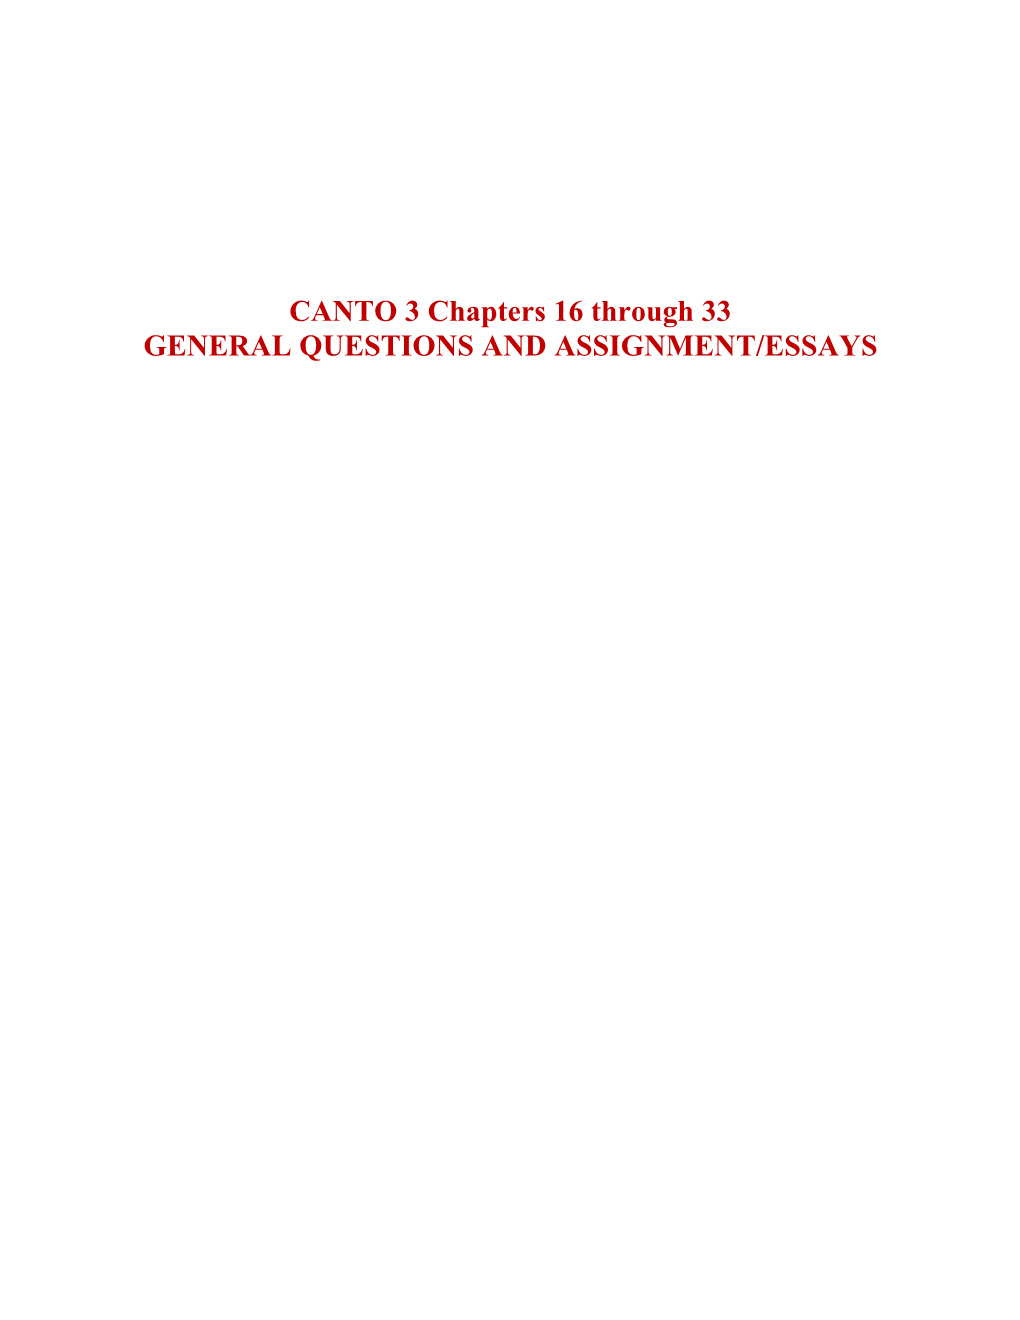 CANTO 3 Chapters 16 Through 33 GENERAL QUESTIONS and ASSIGNMENT/ESSAYS QUESTIONS and ESSAYS for CHAPTERS 16 THROUGH 33